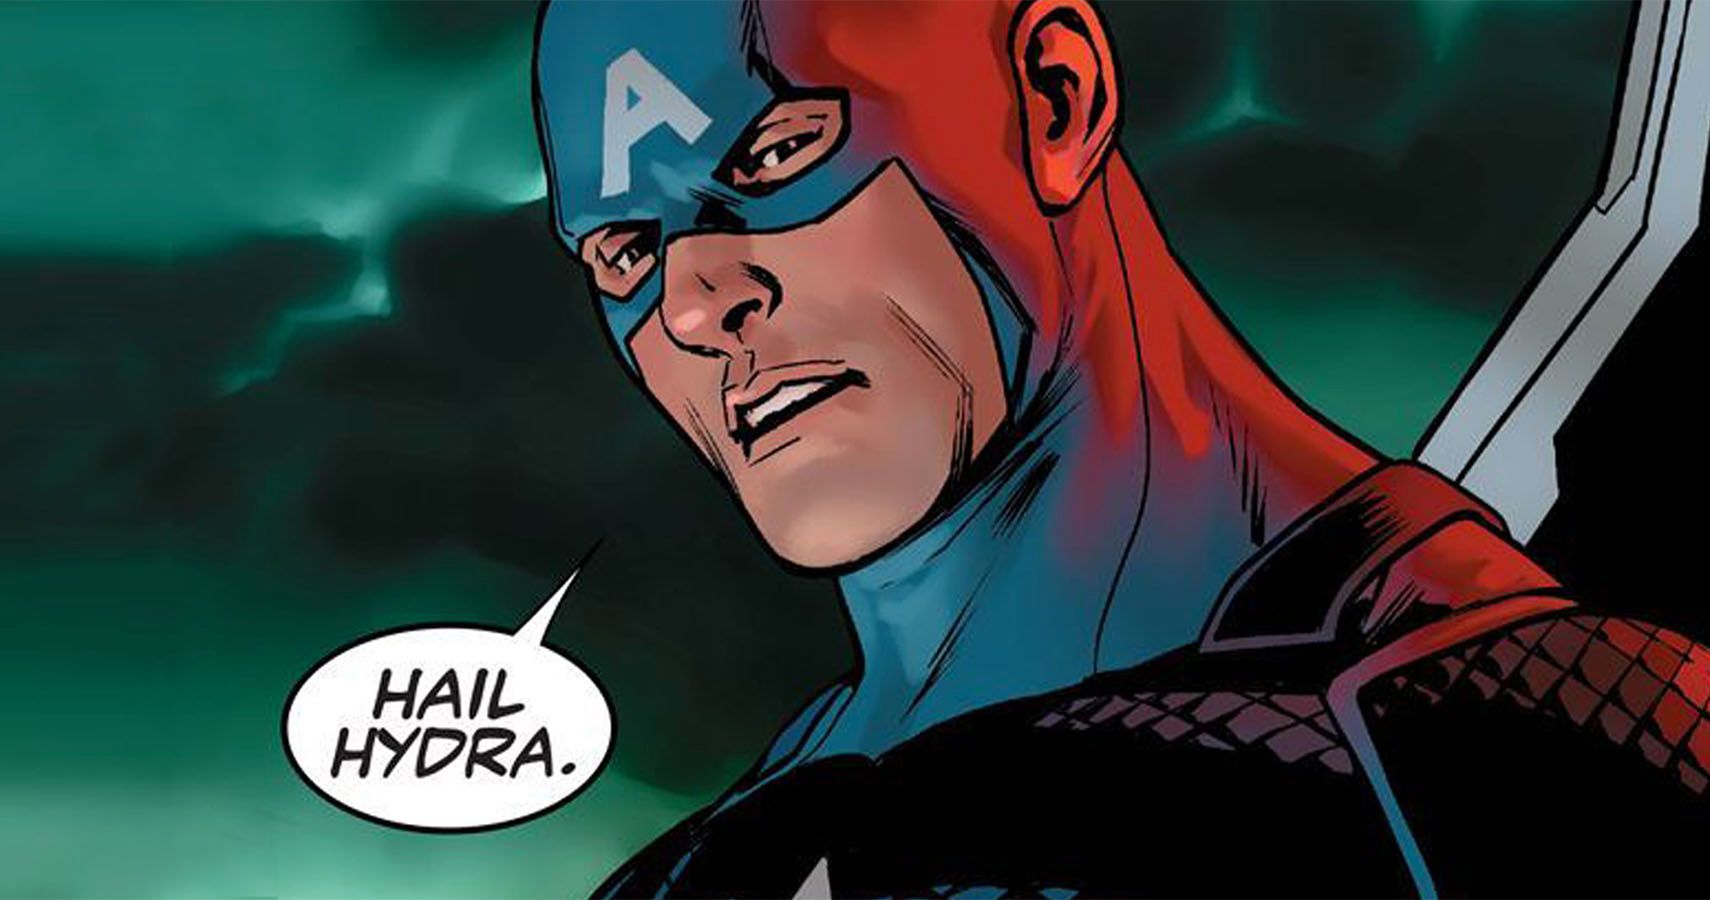 Is cap from hydra downloading tor browser gydra